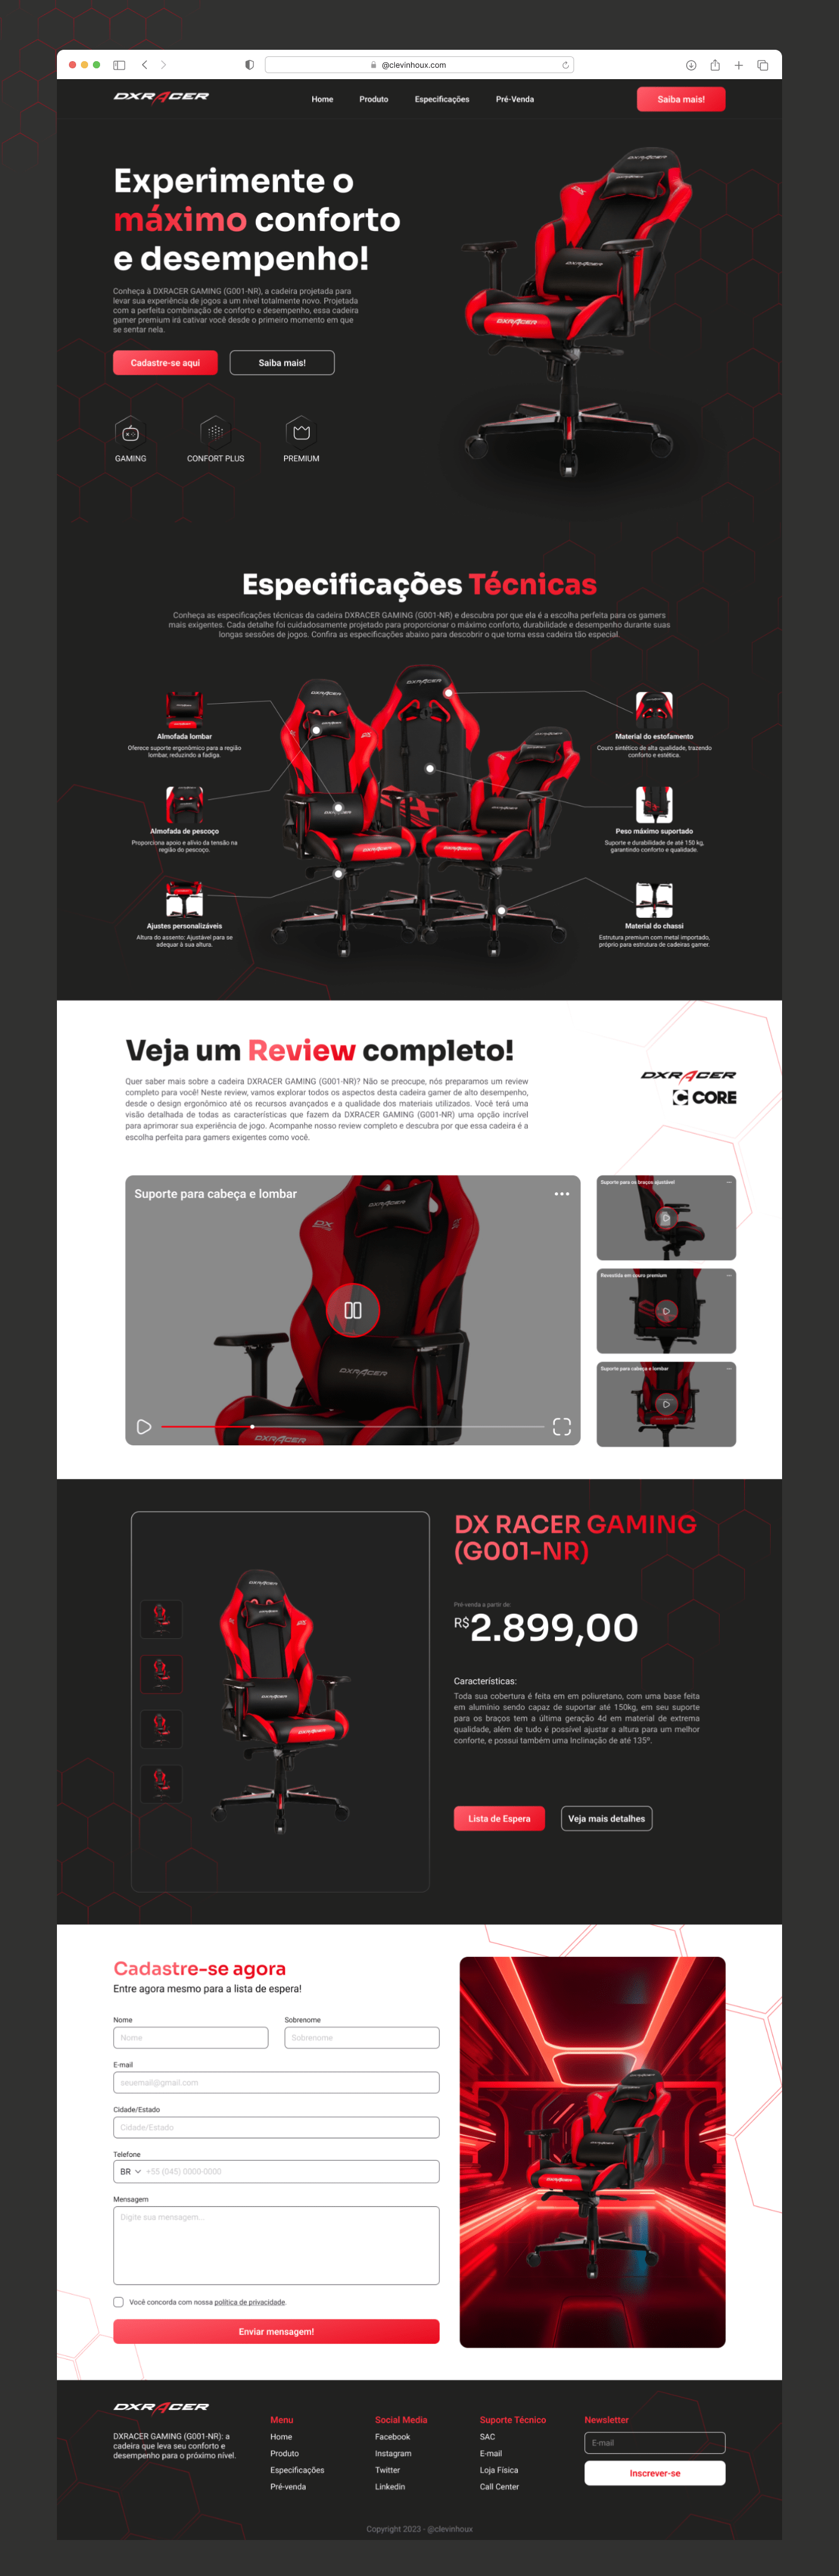 Mobile app user experience landing page concept elementor pro ux best of behance css elementor